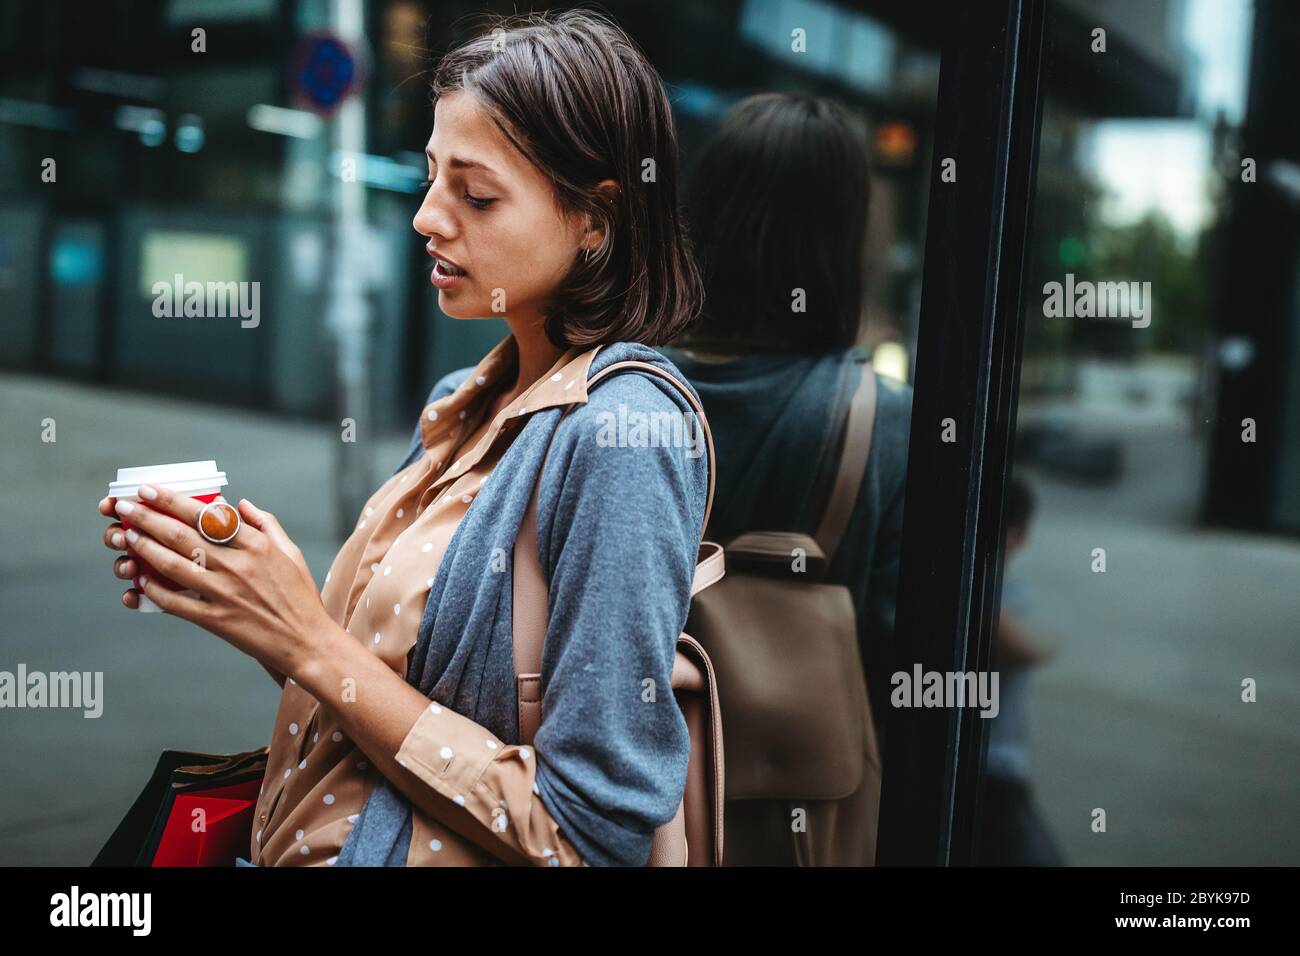 Happy young woman drinking take away coffee and walking with bags after shopping in city. Stock Photo